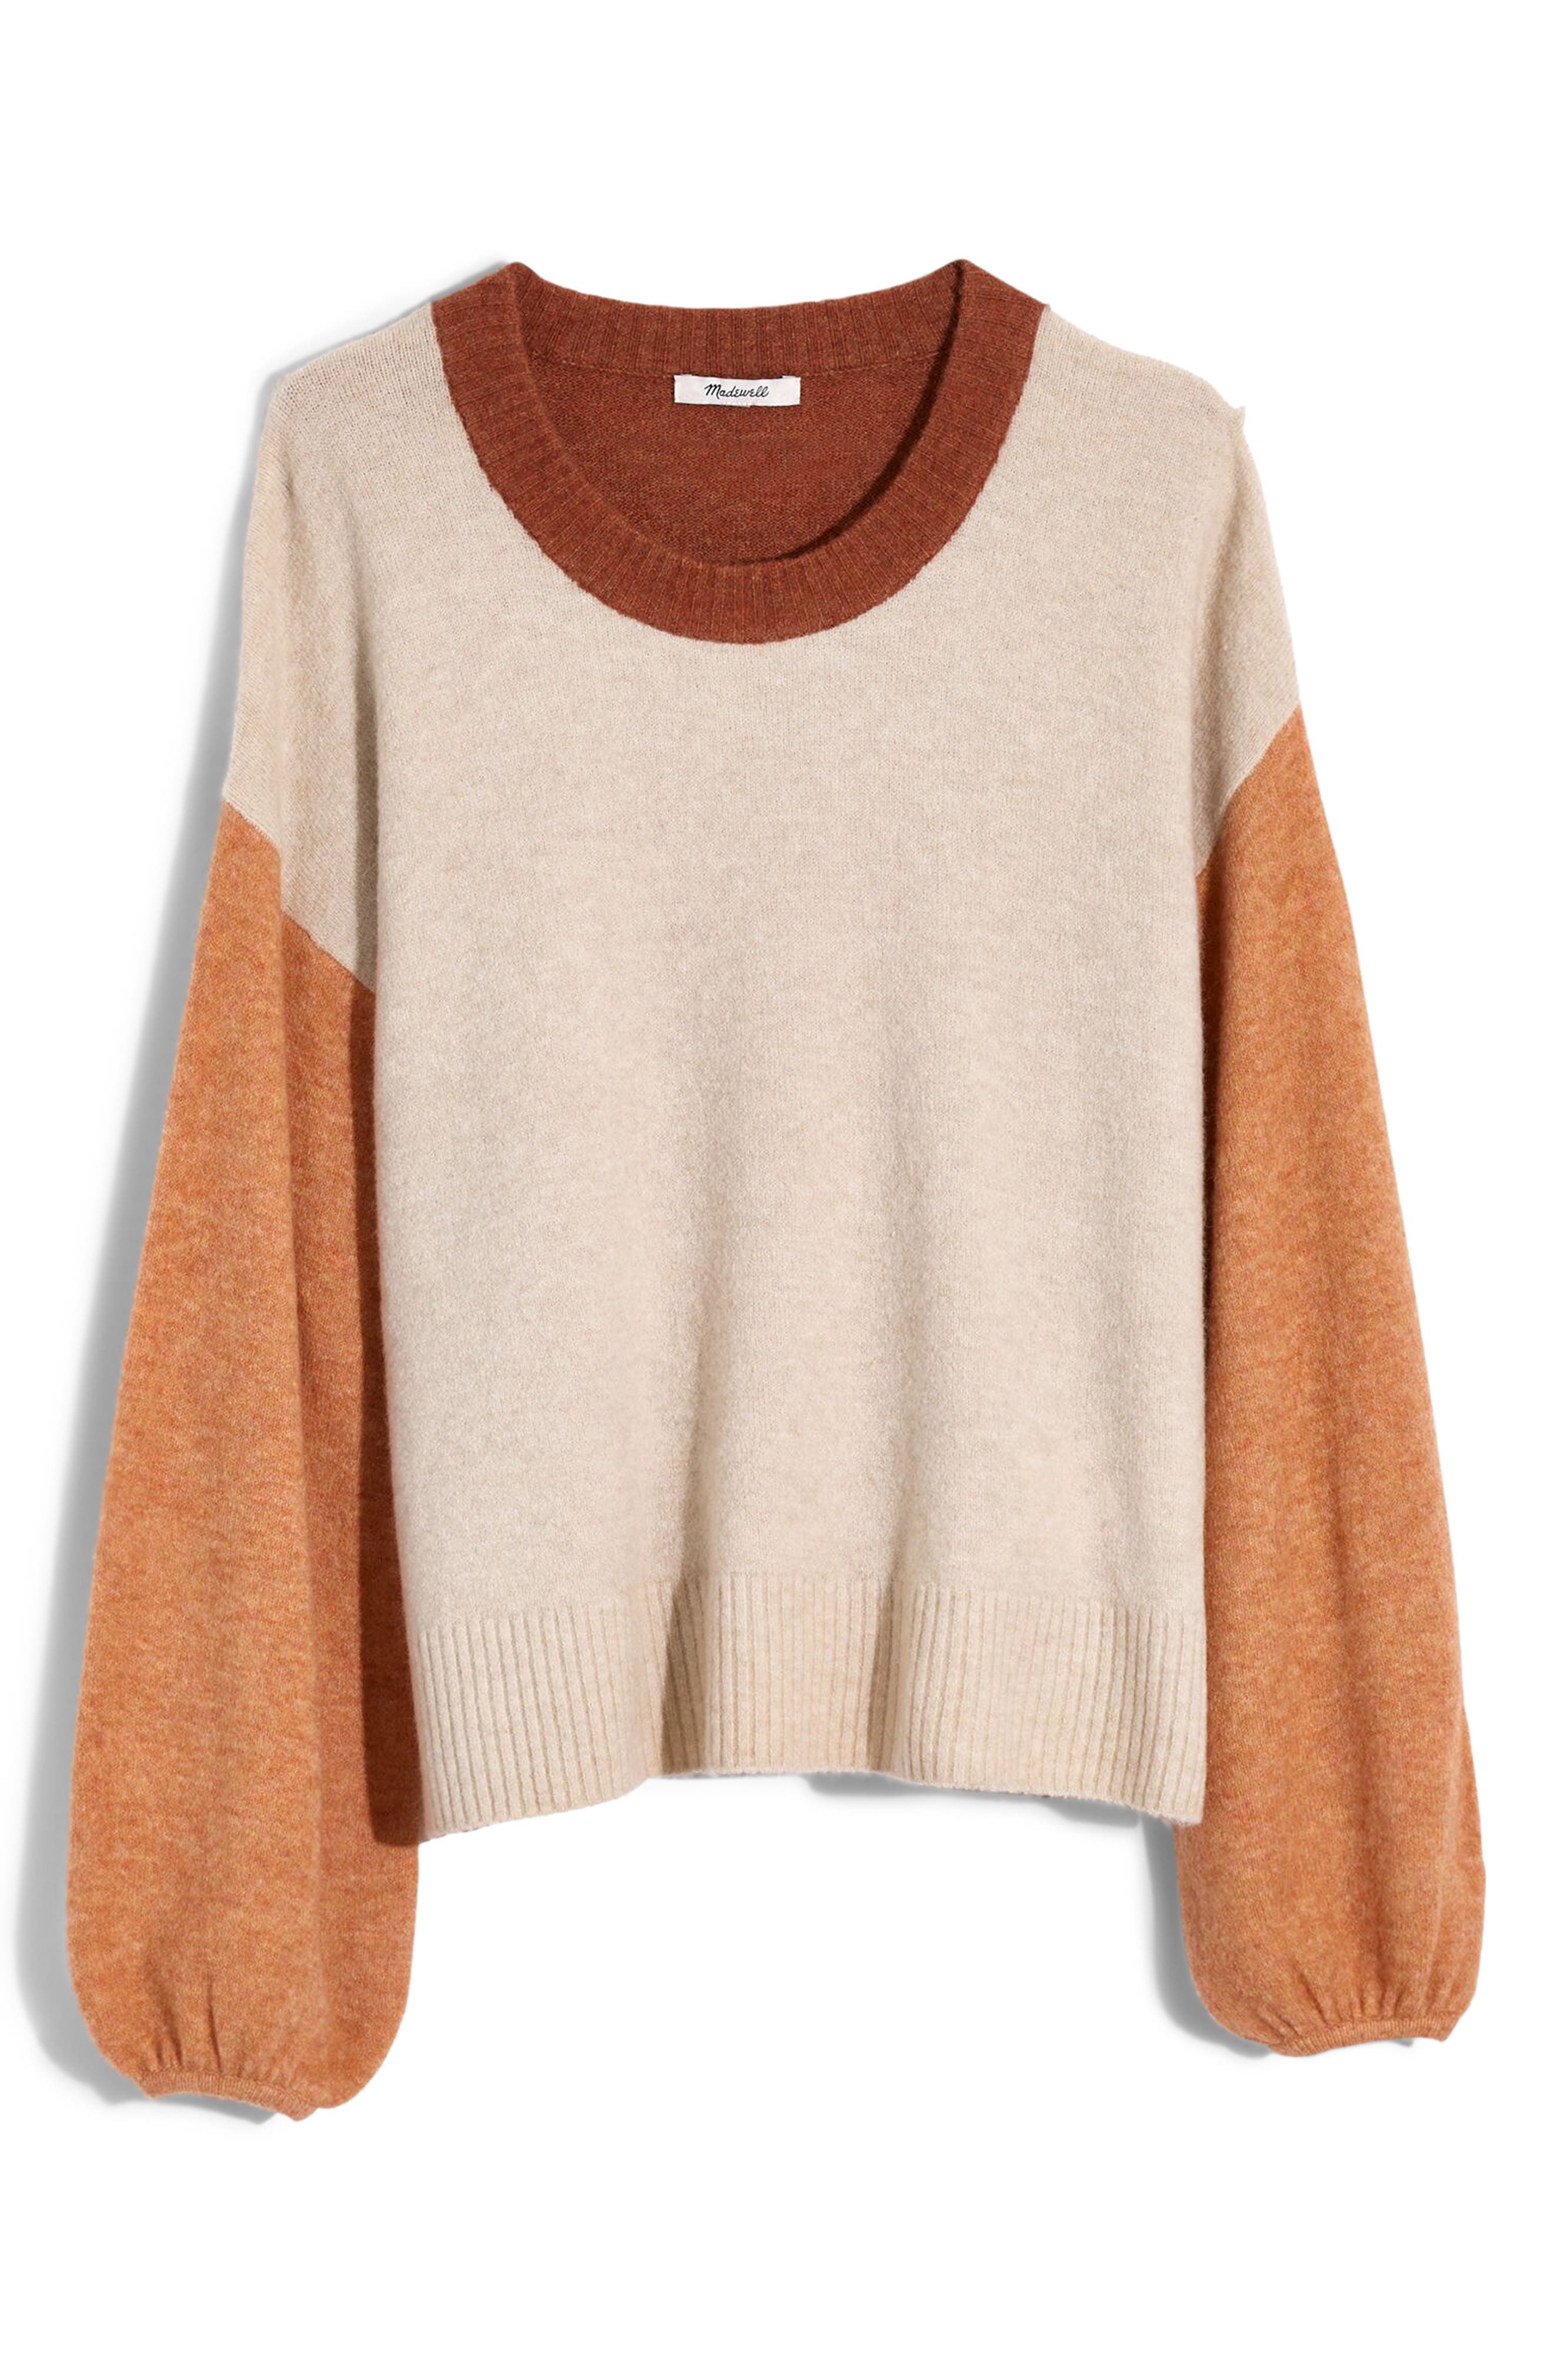 Madewell | Payton Coziest Yarn Colorblock Pullover | Nordstrom Rack